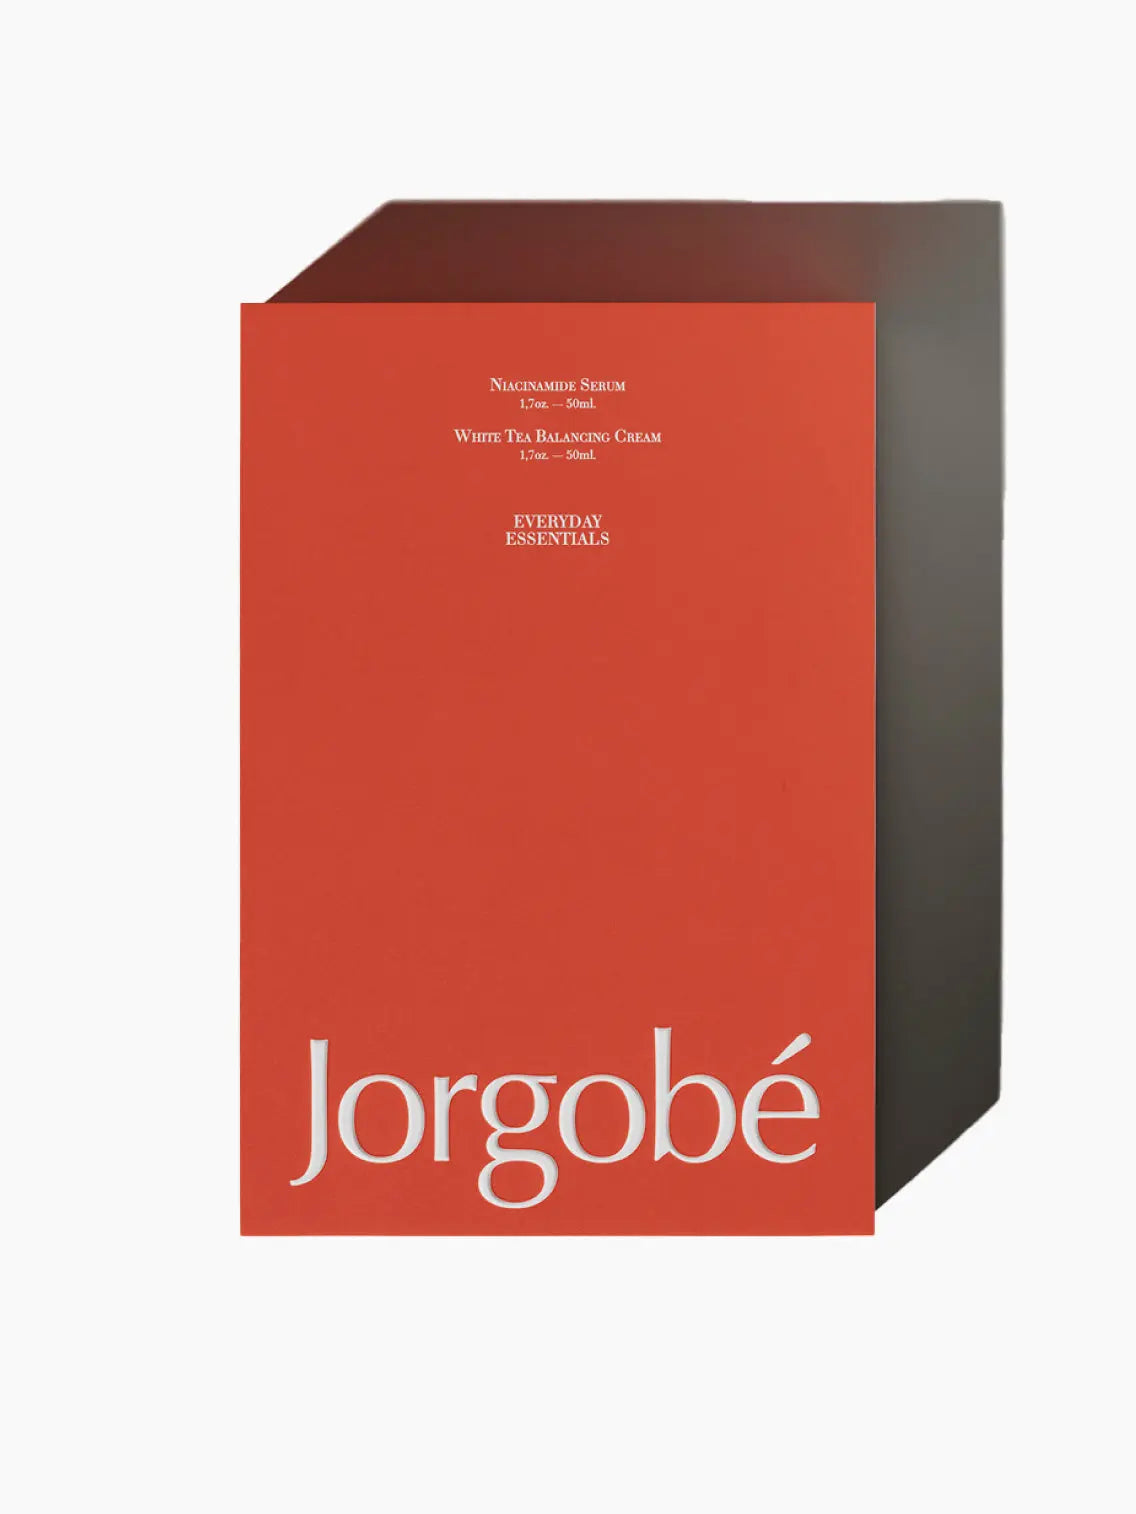 A red rectangular product packaging with the brand name "Jorgobé" in large white letters at the bottom. The text mentions the product contents: niacinamide serum, hand scrub, and white tea balancing cream. The phrase "Everyday Essentials Red Sleeve" is also included. Available exclusively at Bassal Store in Barcelona.